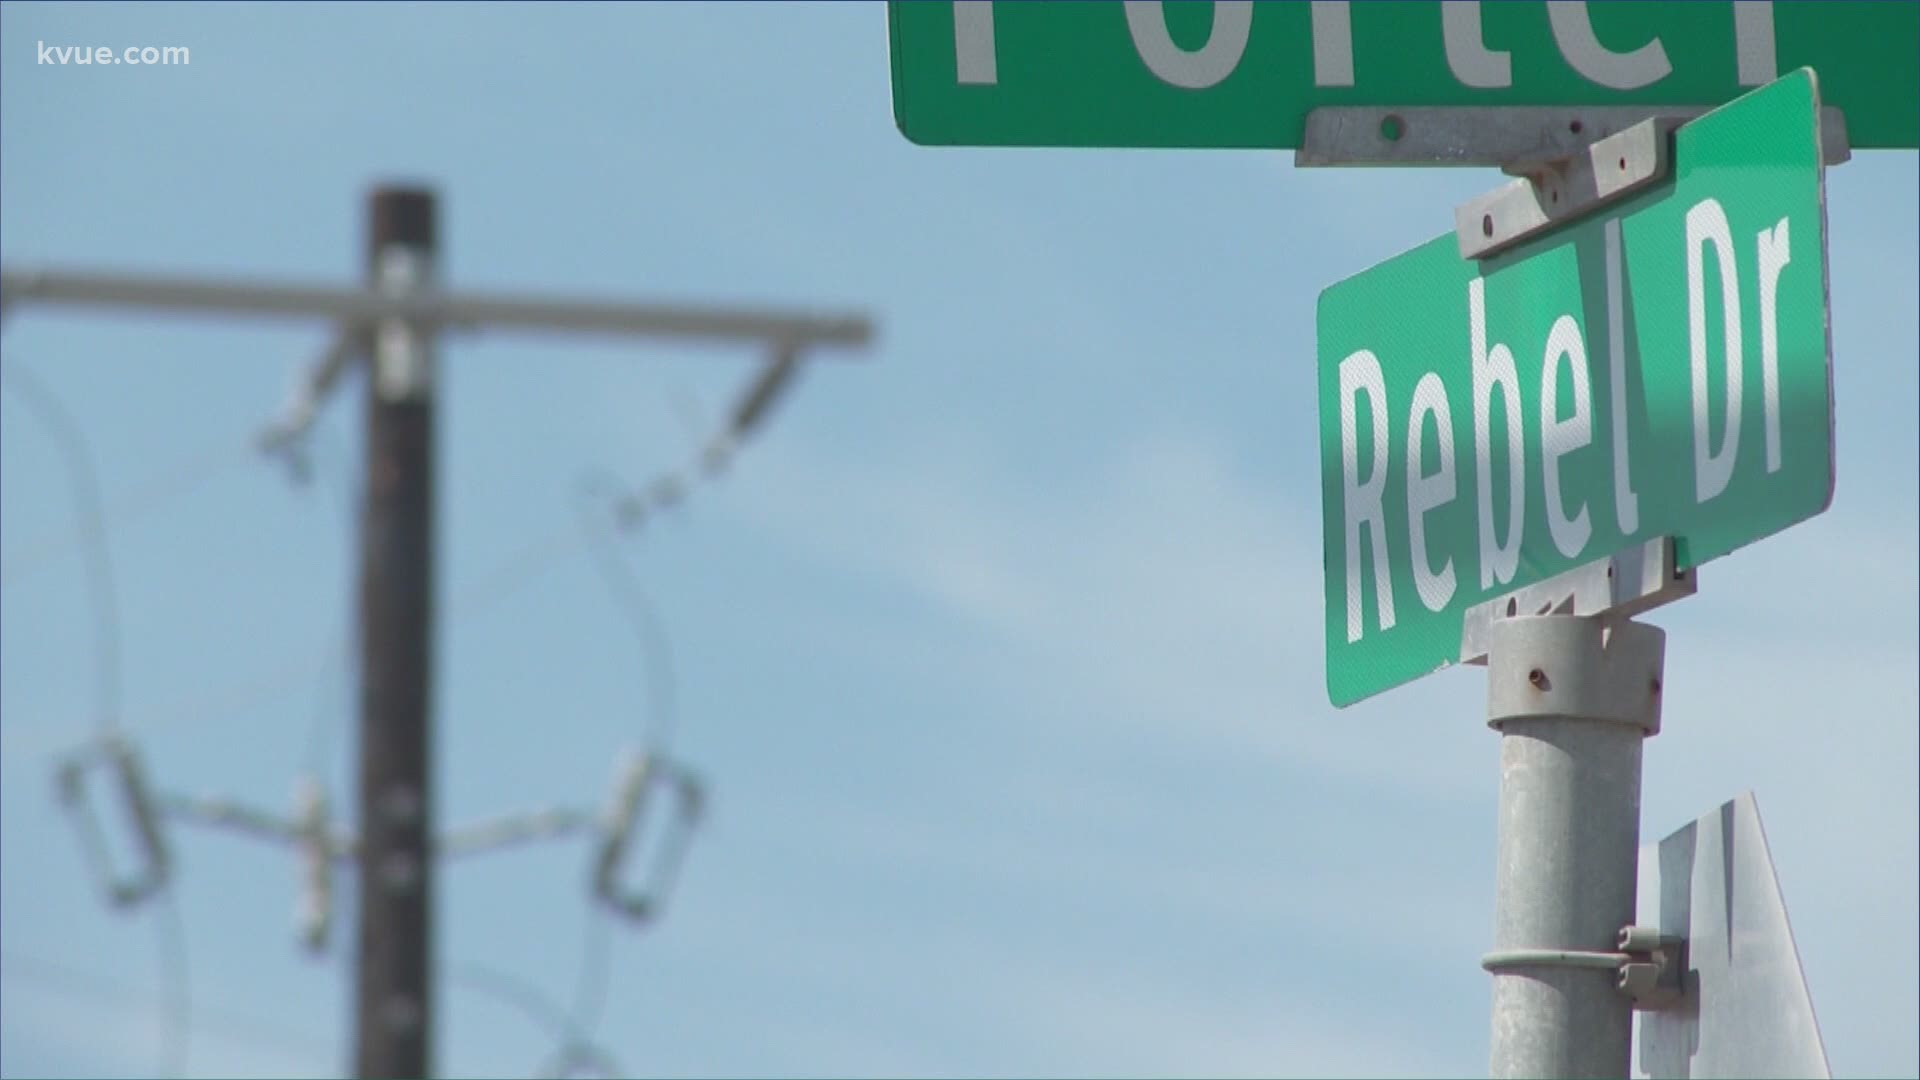 The Kyle City Council gave its approval to change Rebel Drive to Fajita Drive. But some residents are against the new name, saying it invites jokes and humiliation.